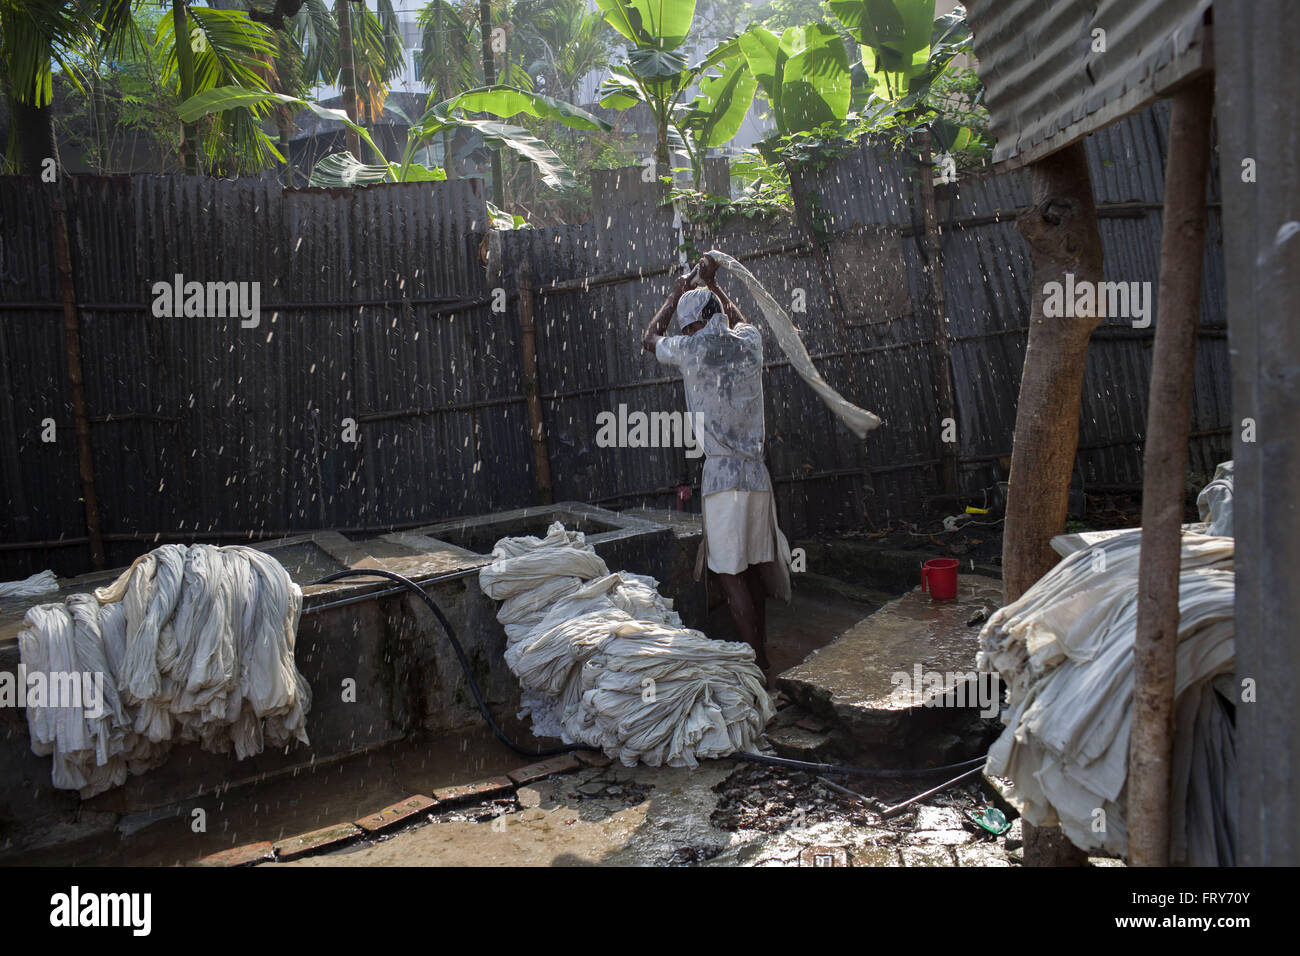 Dhaka, Dhaka, Bangladesh. 24th Mar, 2016. A man washes TB patients' bedcovers near the National Institute of Diseases of Chest and Hospital on World Tuberculosis Day in Dhaka, Bangladesh, Thursday, March 24, 2016. Tuberculosis (TB) is a worldwide public health problem. The incident of TB is much higher in developing countries such as Bangladesh. The country ranks sixth among 22 highest burden TB countries in the world. The World Health Organization estimates that approximately 570000 people are currently suffering from TB disease in Bangladesh. Every year more than 300,000 people develop T Stock Photo